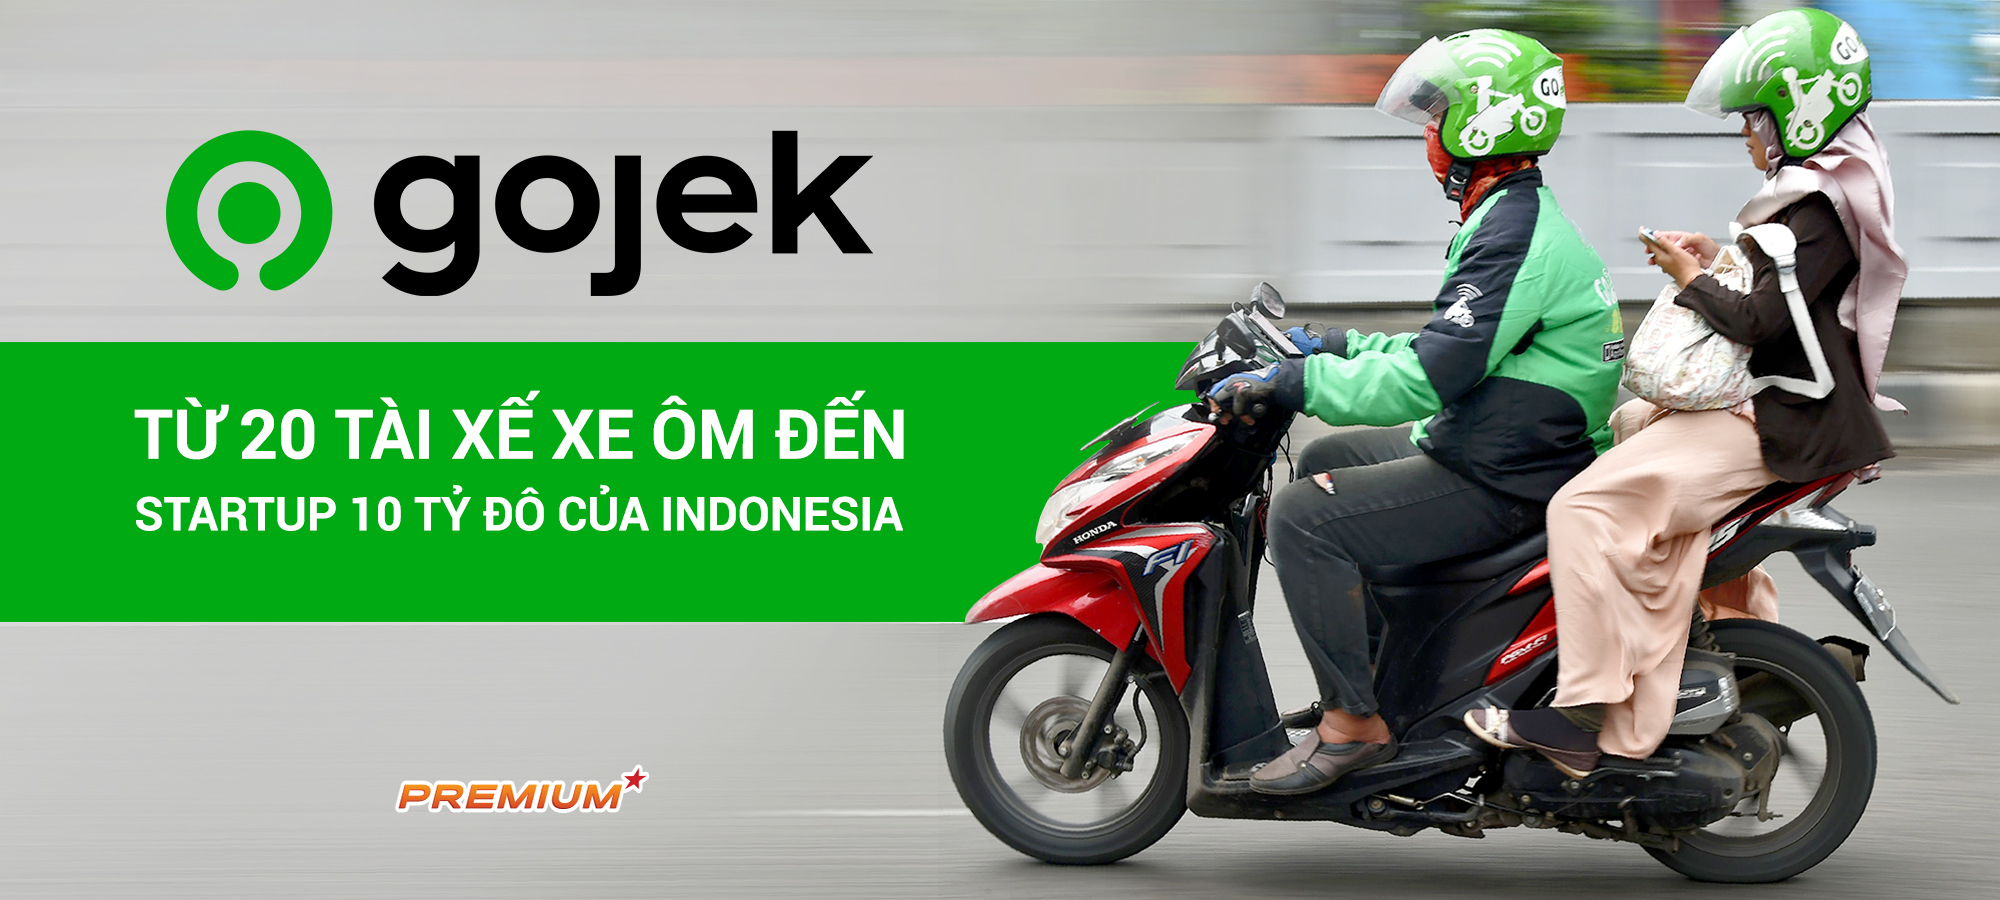 Gojek: From 20 motorbike taxi drivers to Indonesia's 10 billion dollar startup - Photo 1.